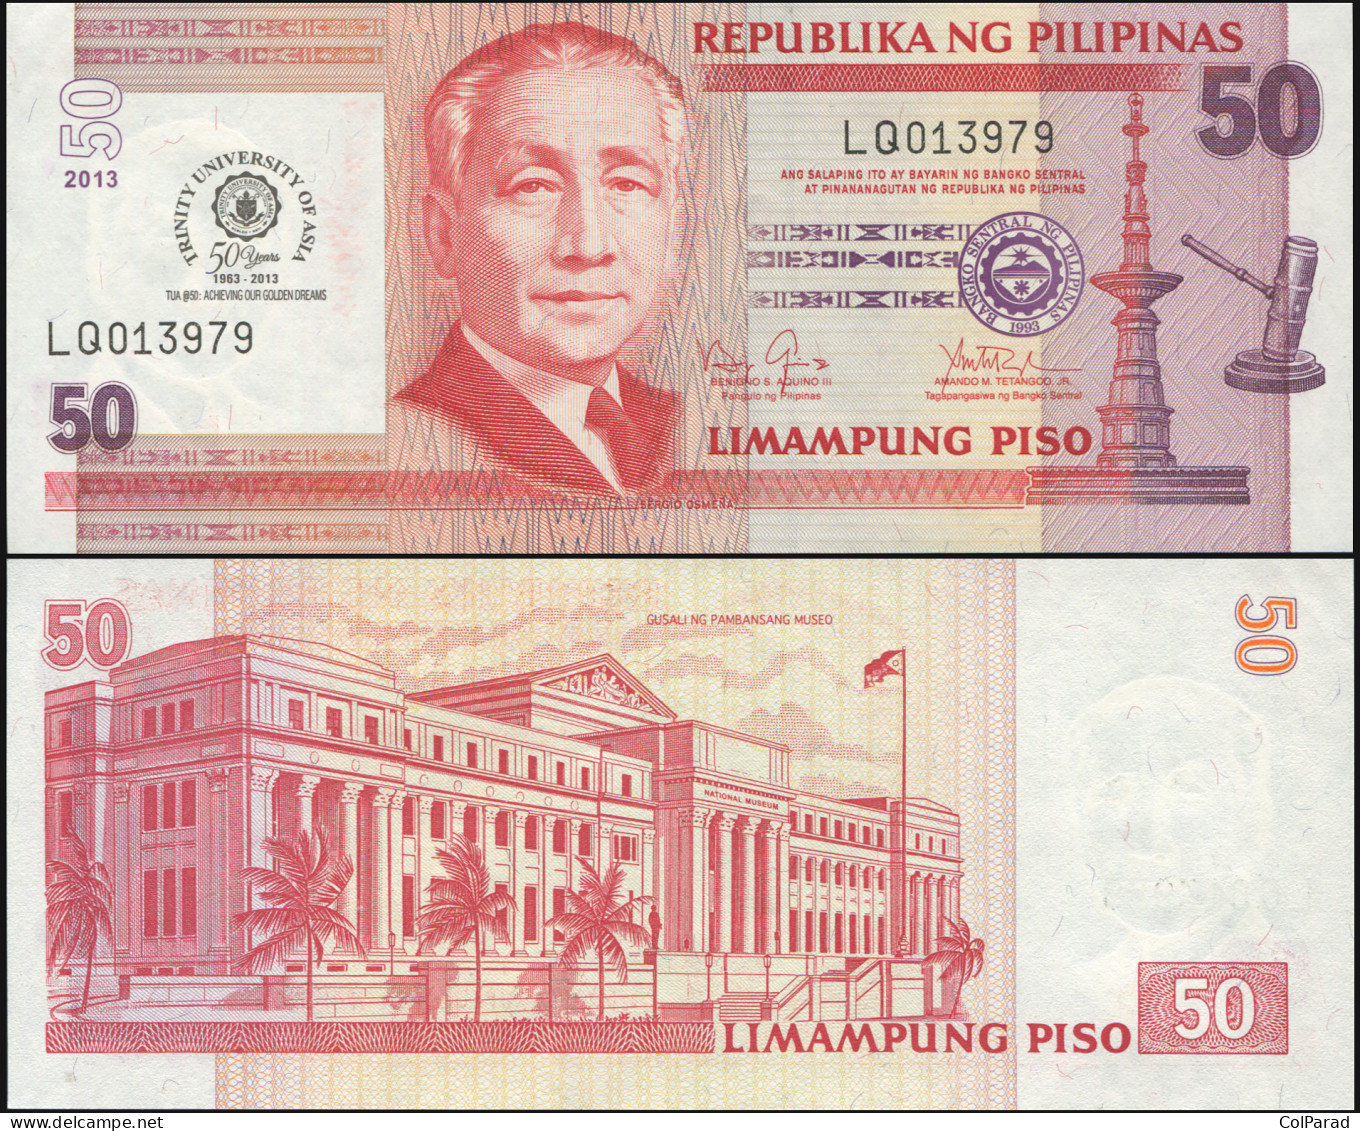 PHILIPPINES 50 PISO - 2013 - Paper Unc - P.216a Banknote - Trinity University - Philippines